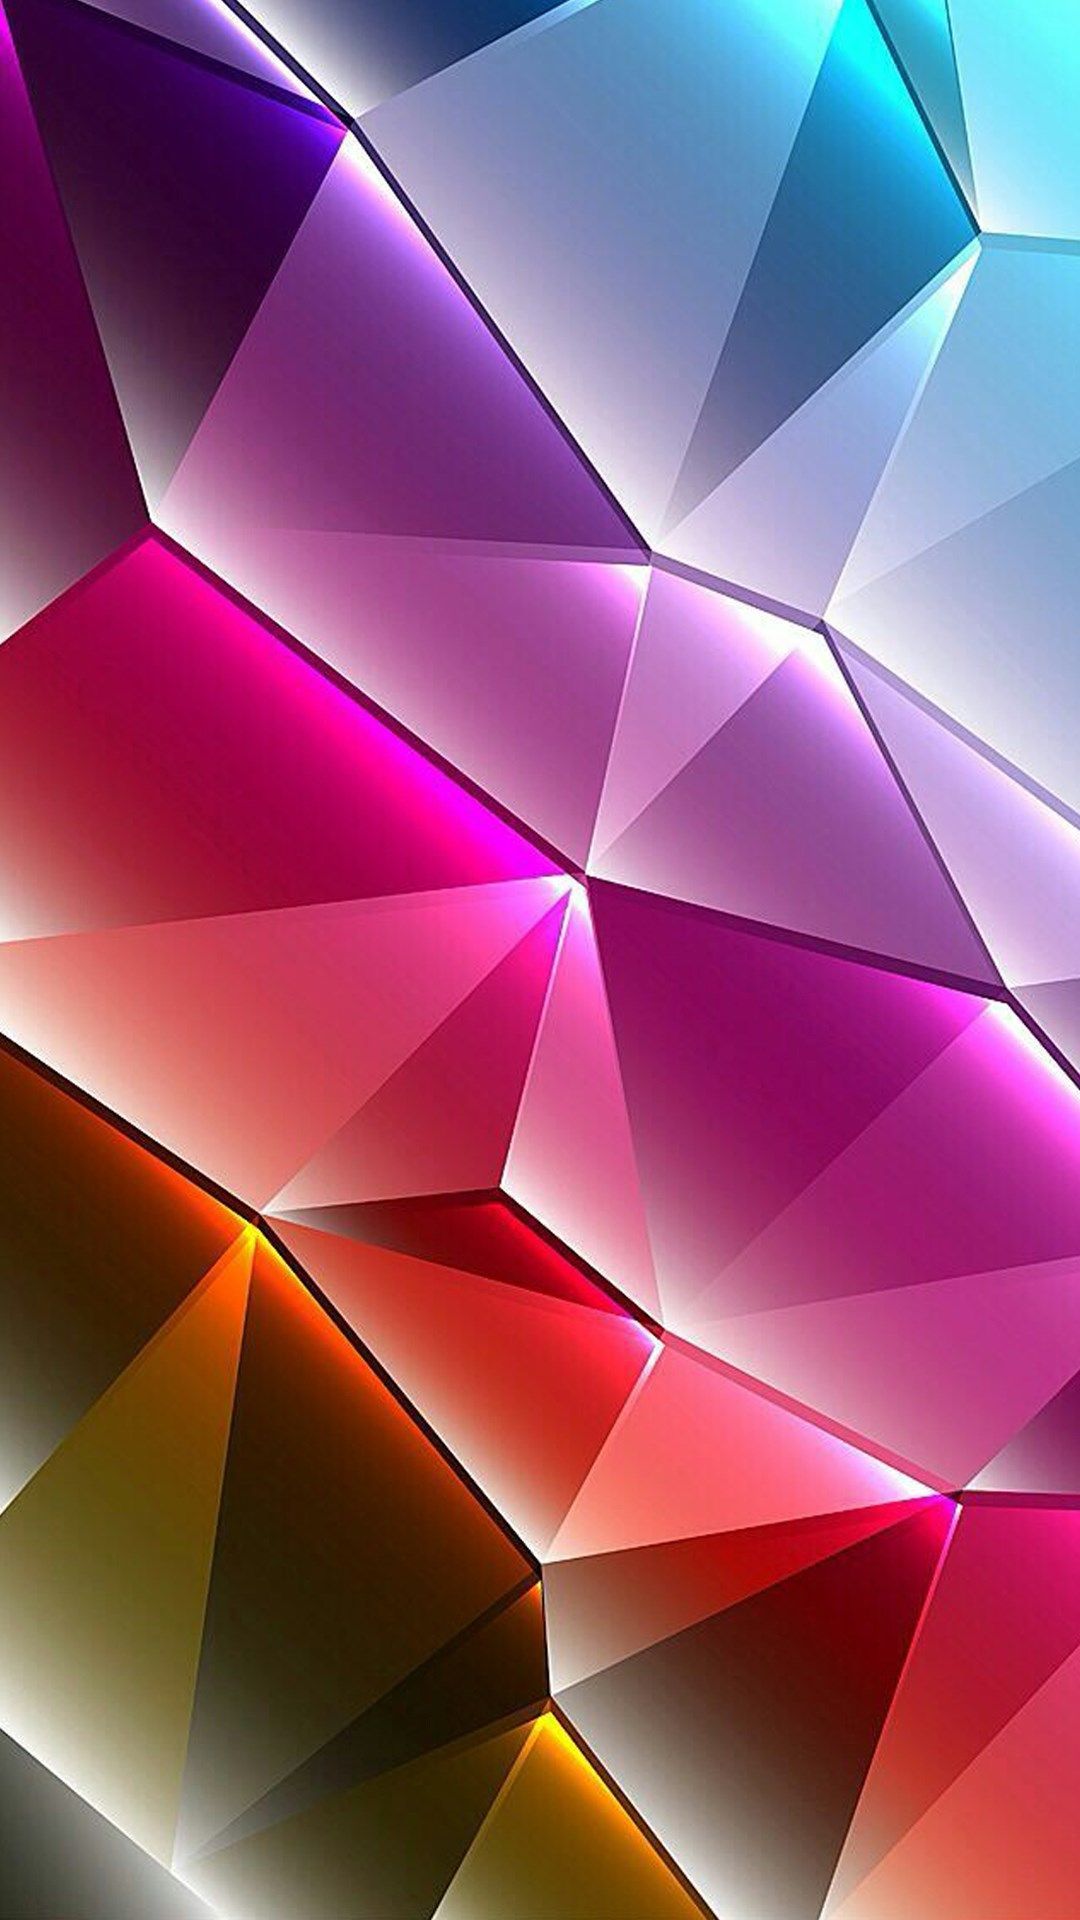 Xiaomi Redmi Note 4 Wallpapers posted by John Tremblay